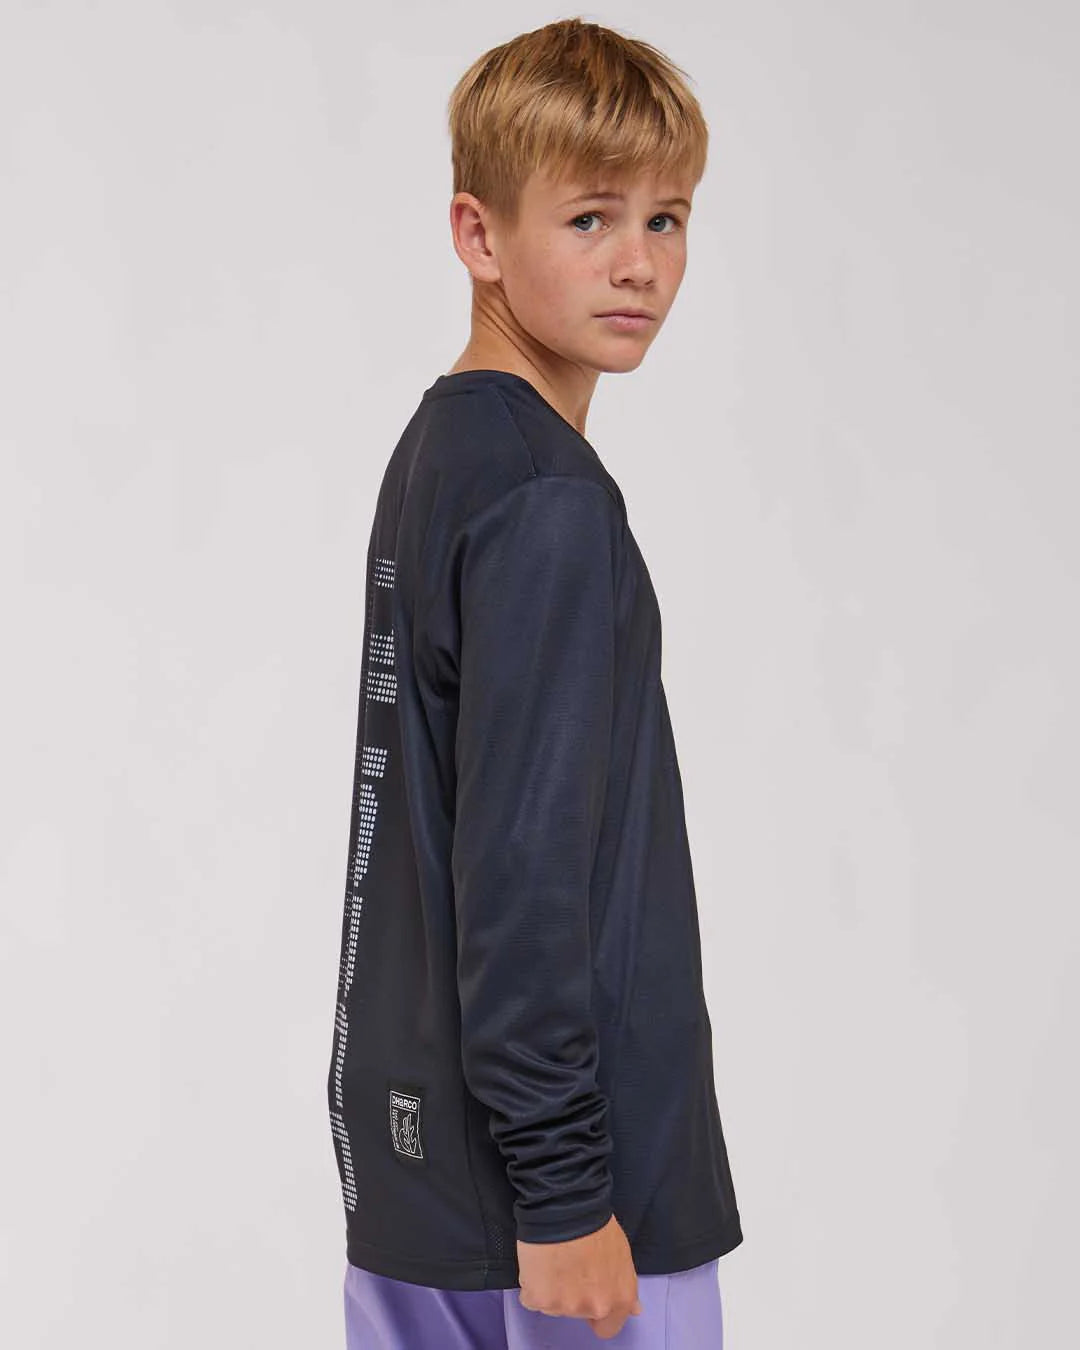 DHaRCO   YOUTH GRAVITY JERSEY  Stealth